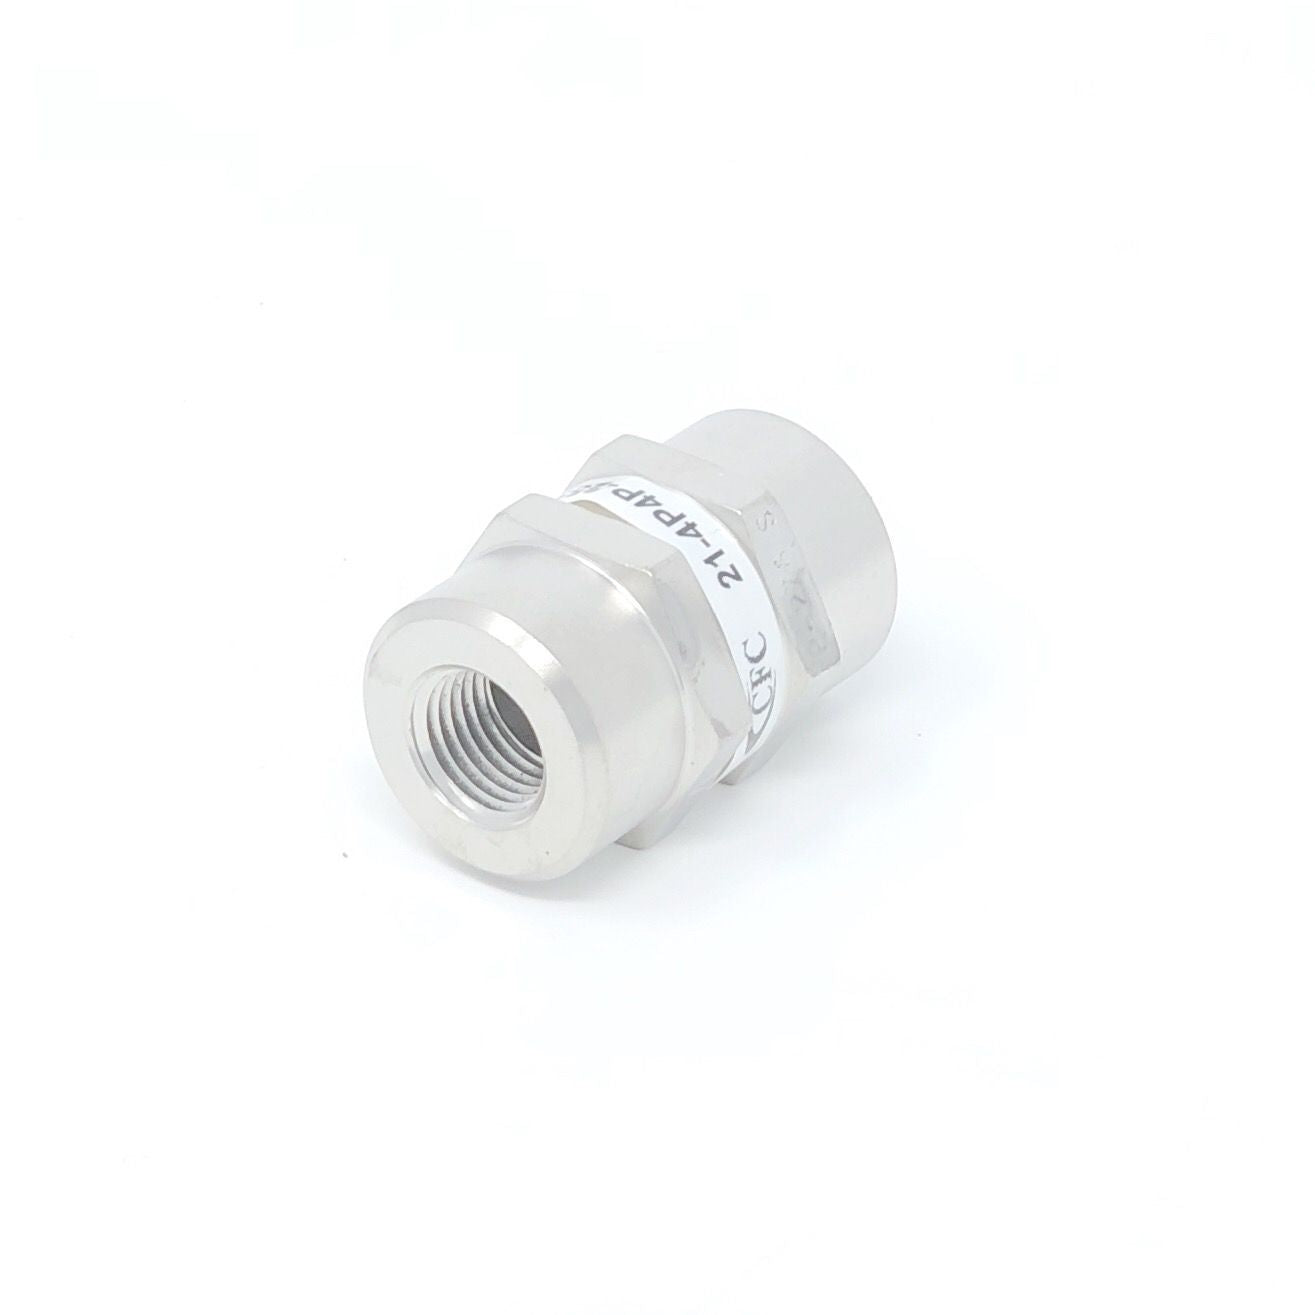 21-12N12N-100S : Chase High Pressure Inline Filter, 3000psi, 3/4" NPT, 100 Micron, No Visual Indicator, With Bypass